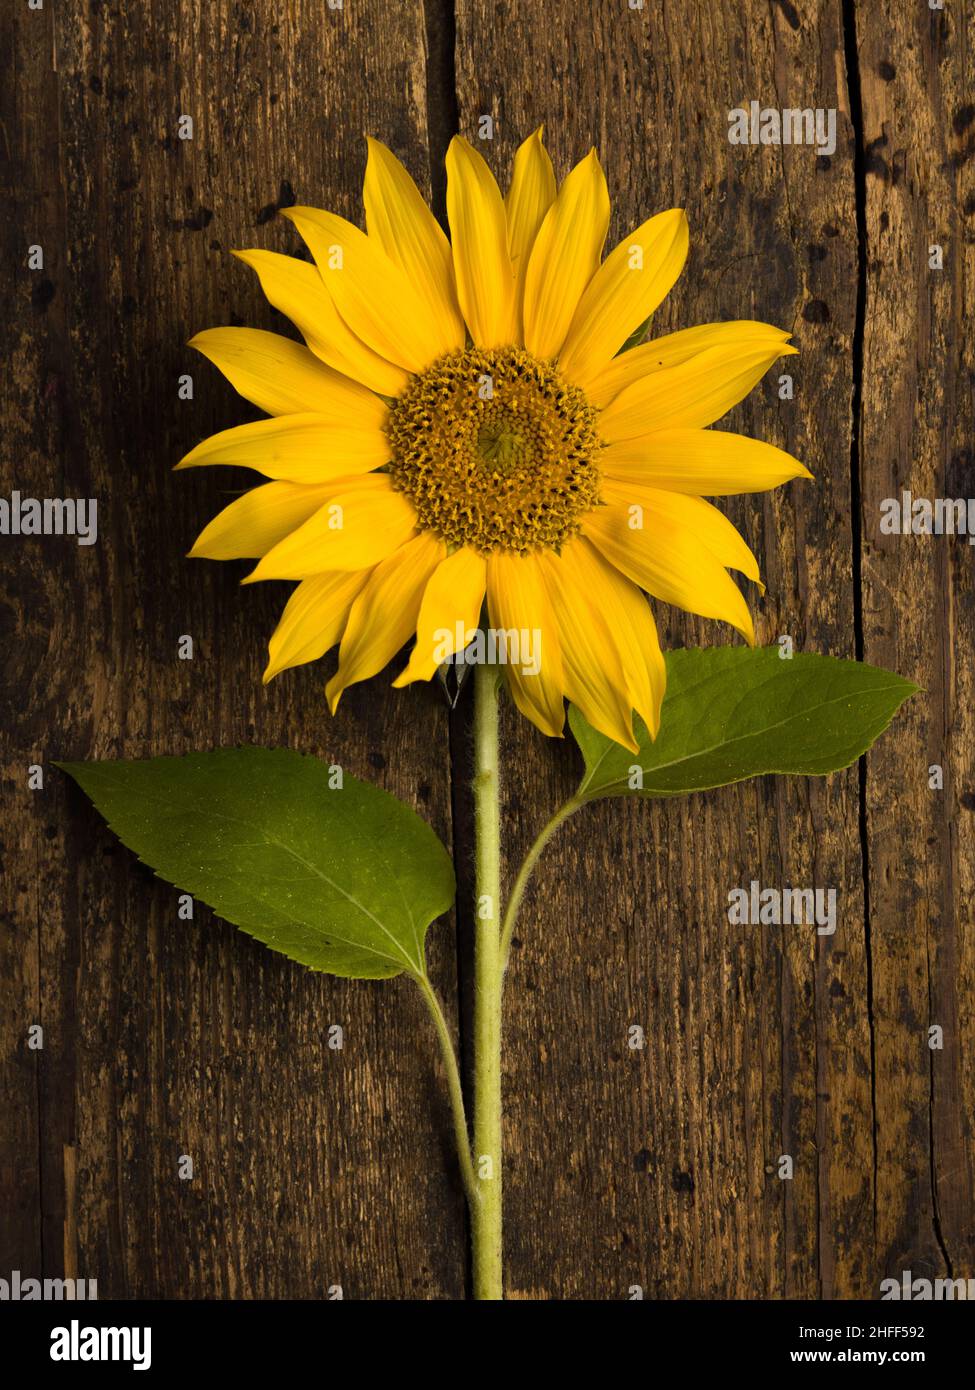 Closeup of a single sunflower on a vintage weathered wooden backdrop Stock Photo